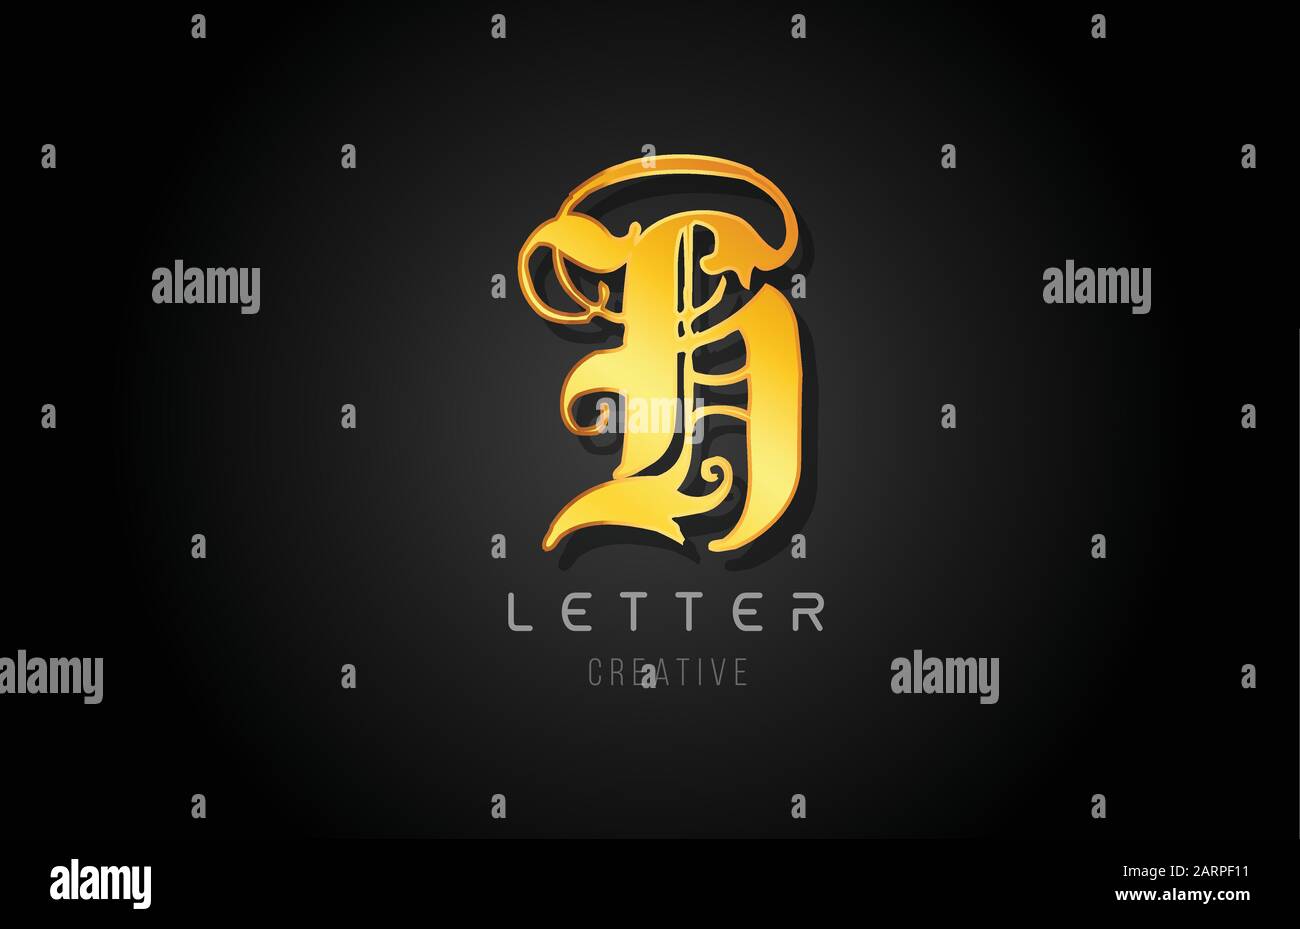 Set of gold and bling letters  Graphic design logo, Marketing logo, Icon  design